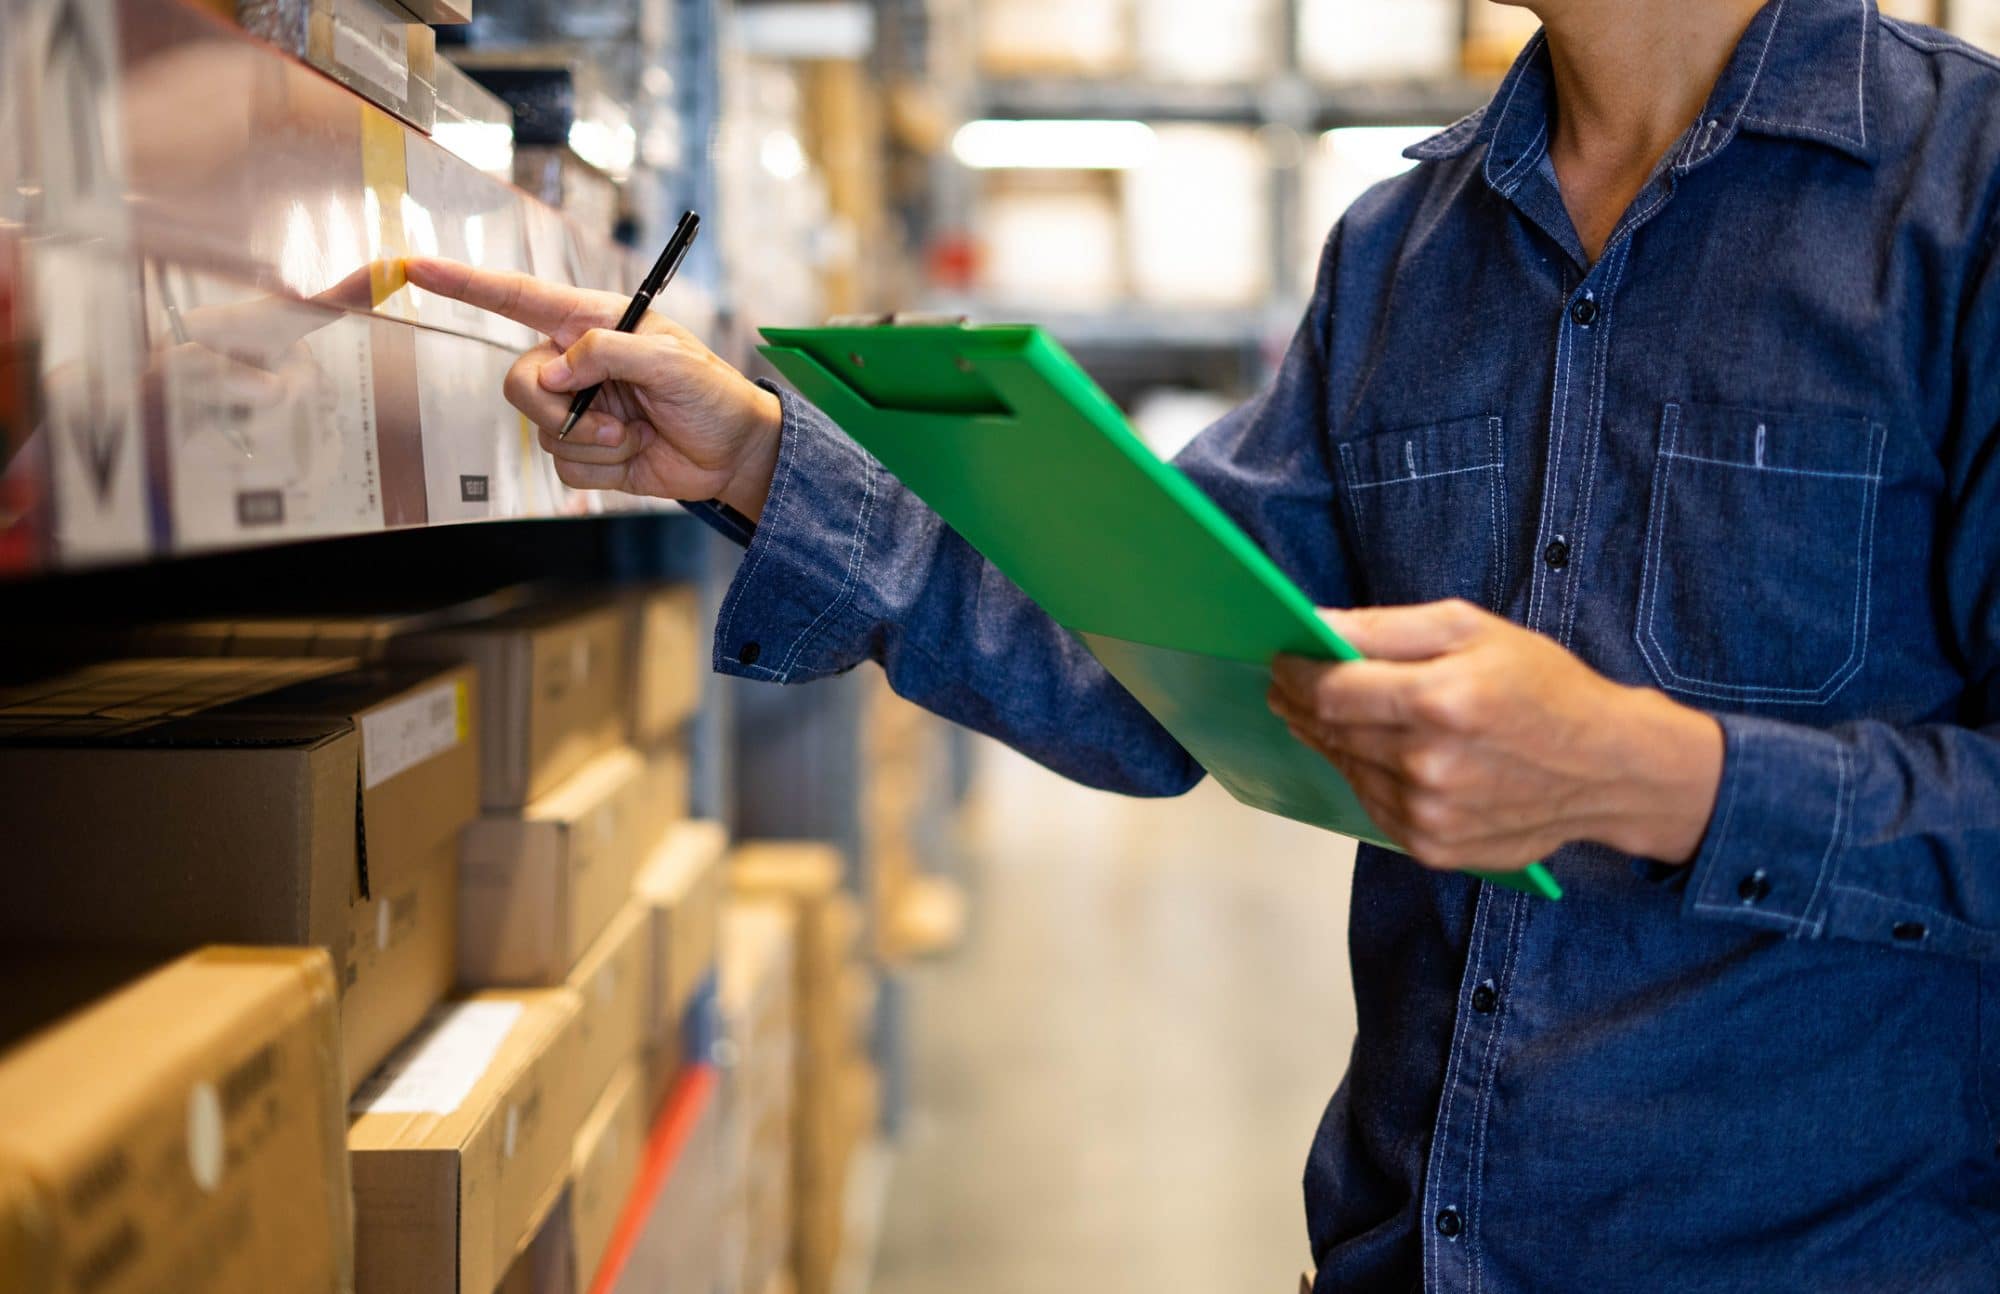 Inventory management in retail